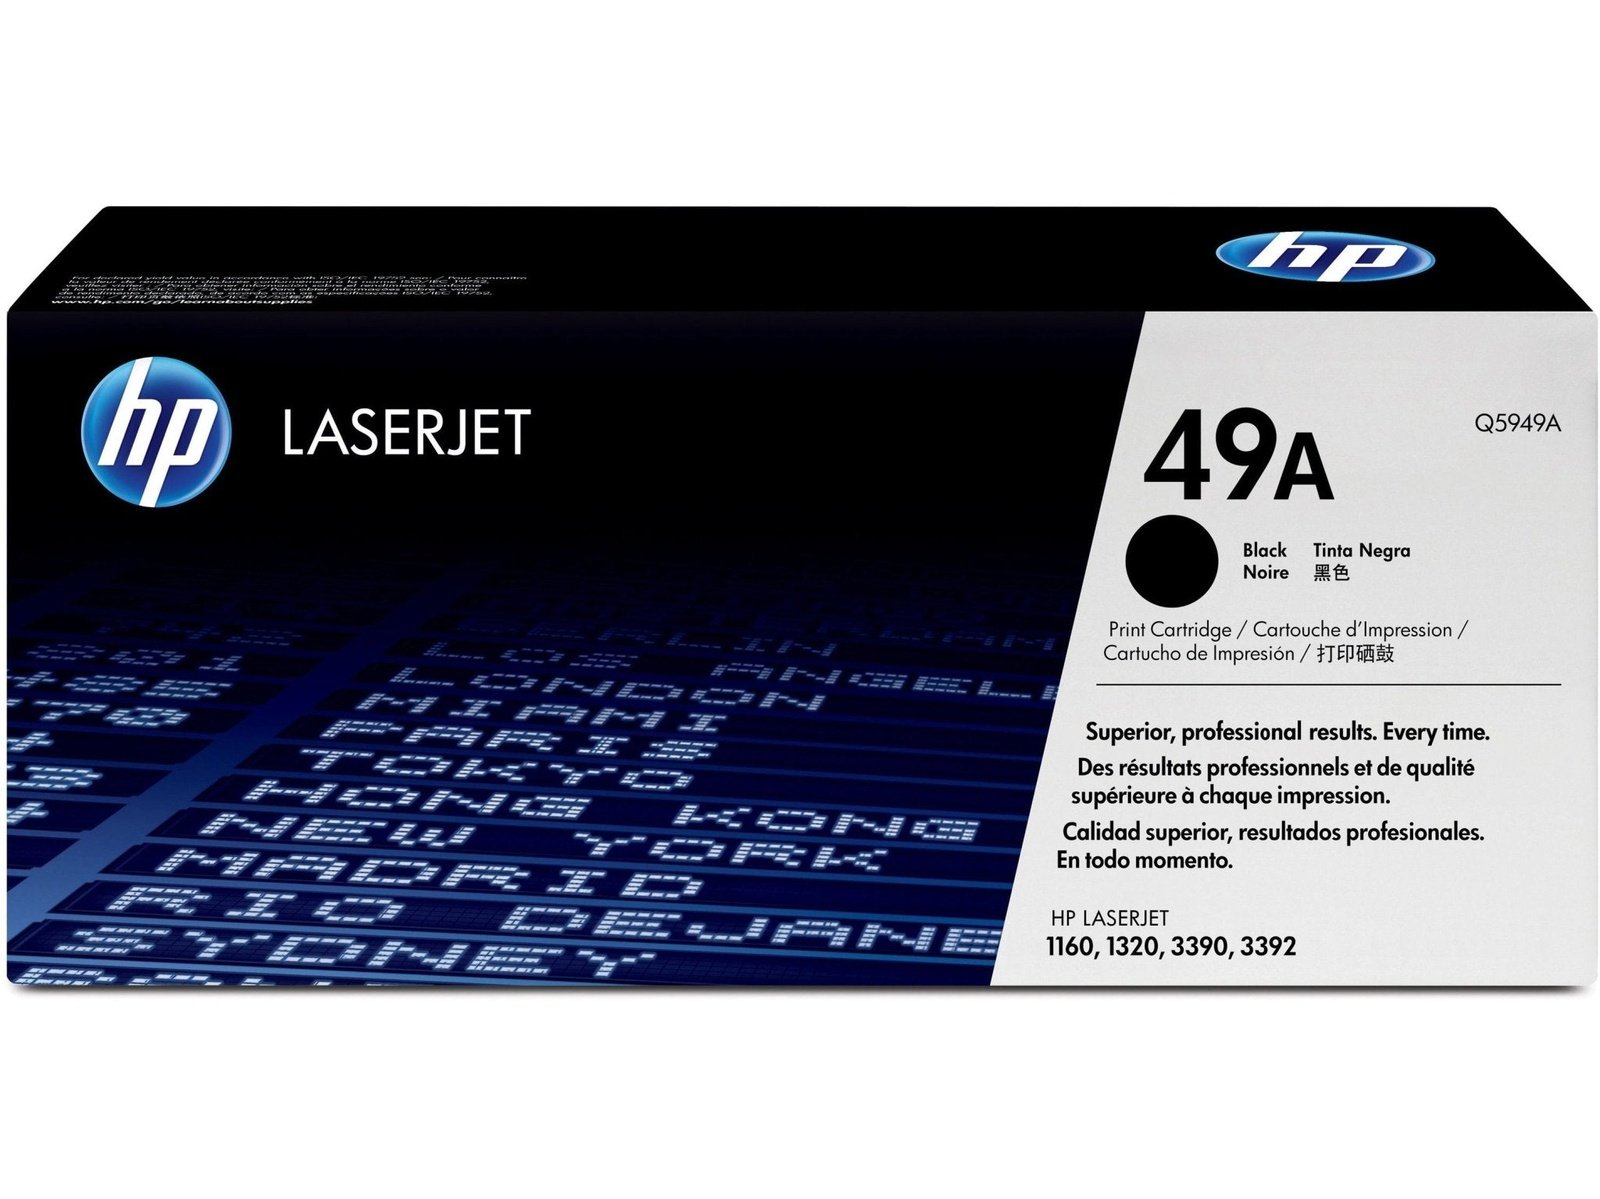 ICU Compatible/ OEM Get HP ICU-Q5949A-BK Yields 2500 Pages Q5949A Toner Cartridge (Black) 2500 Page Yield